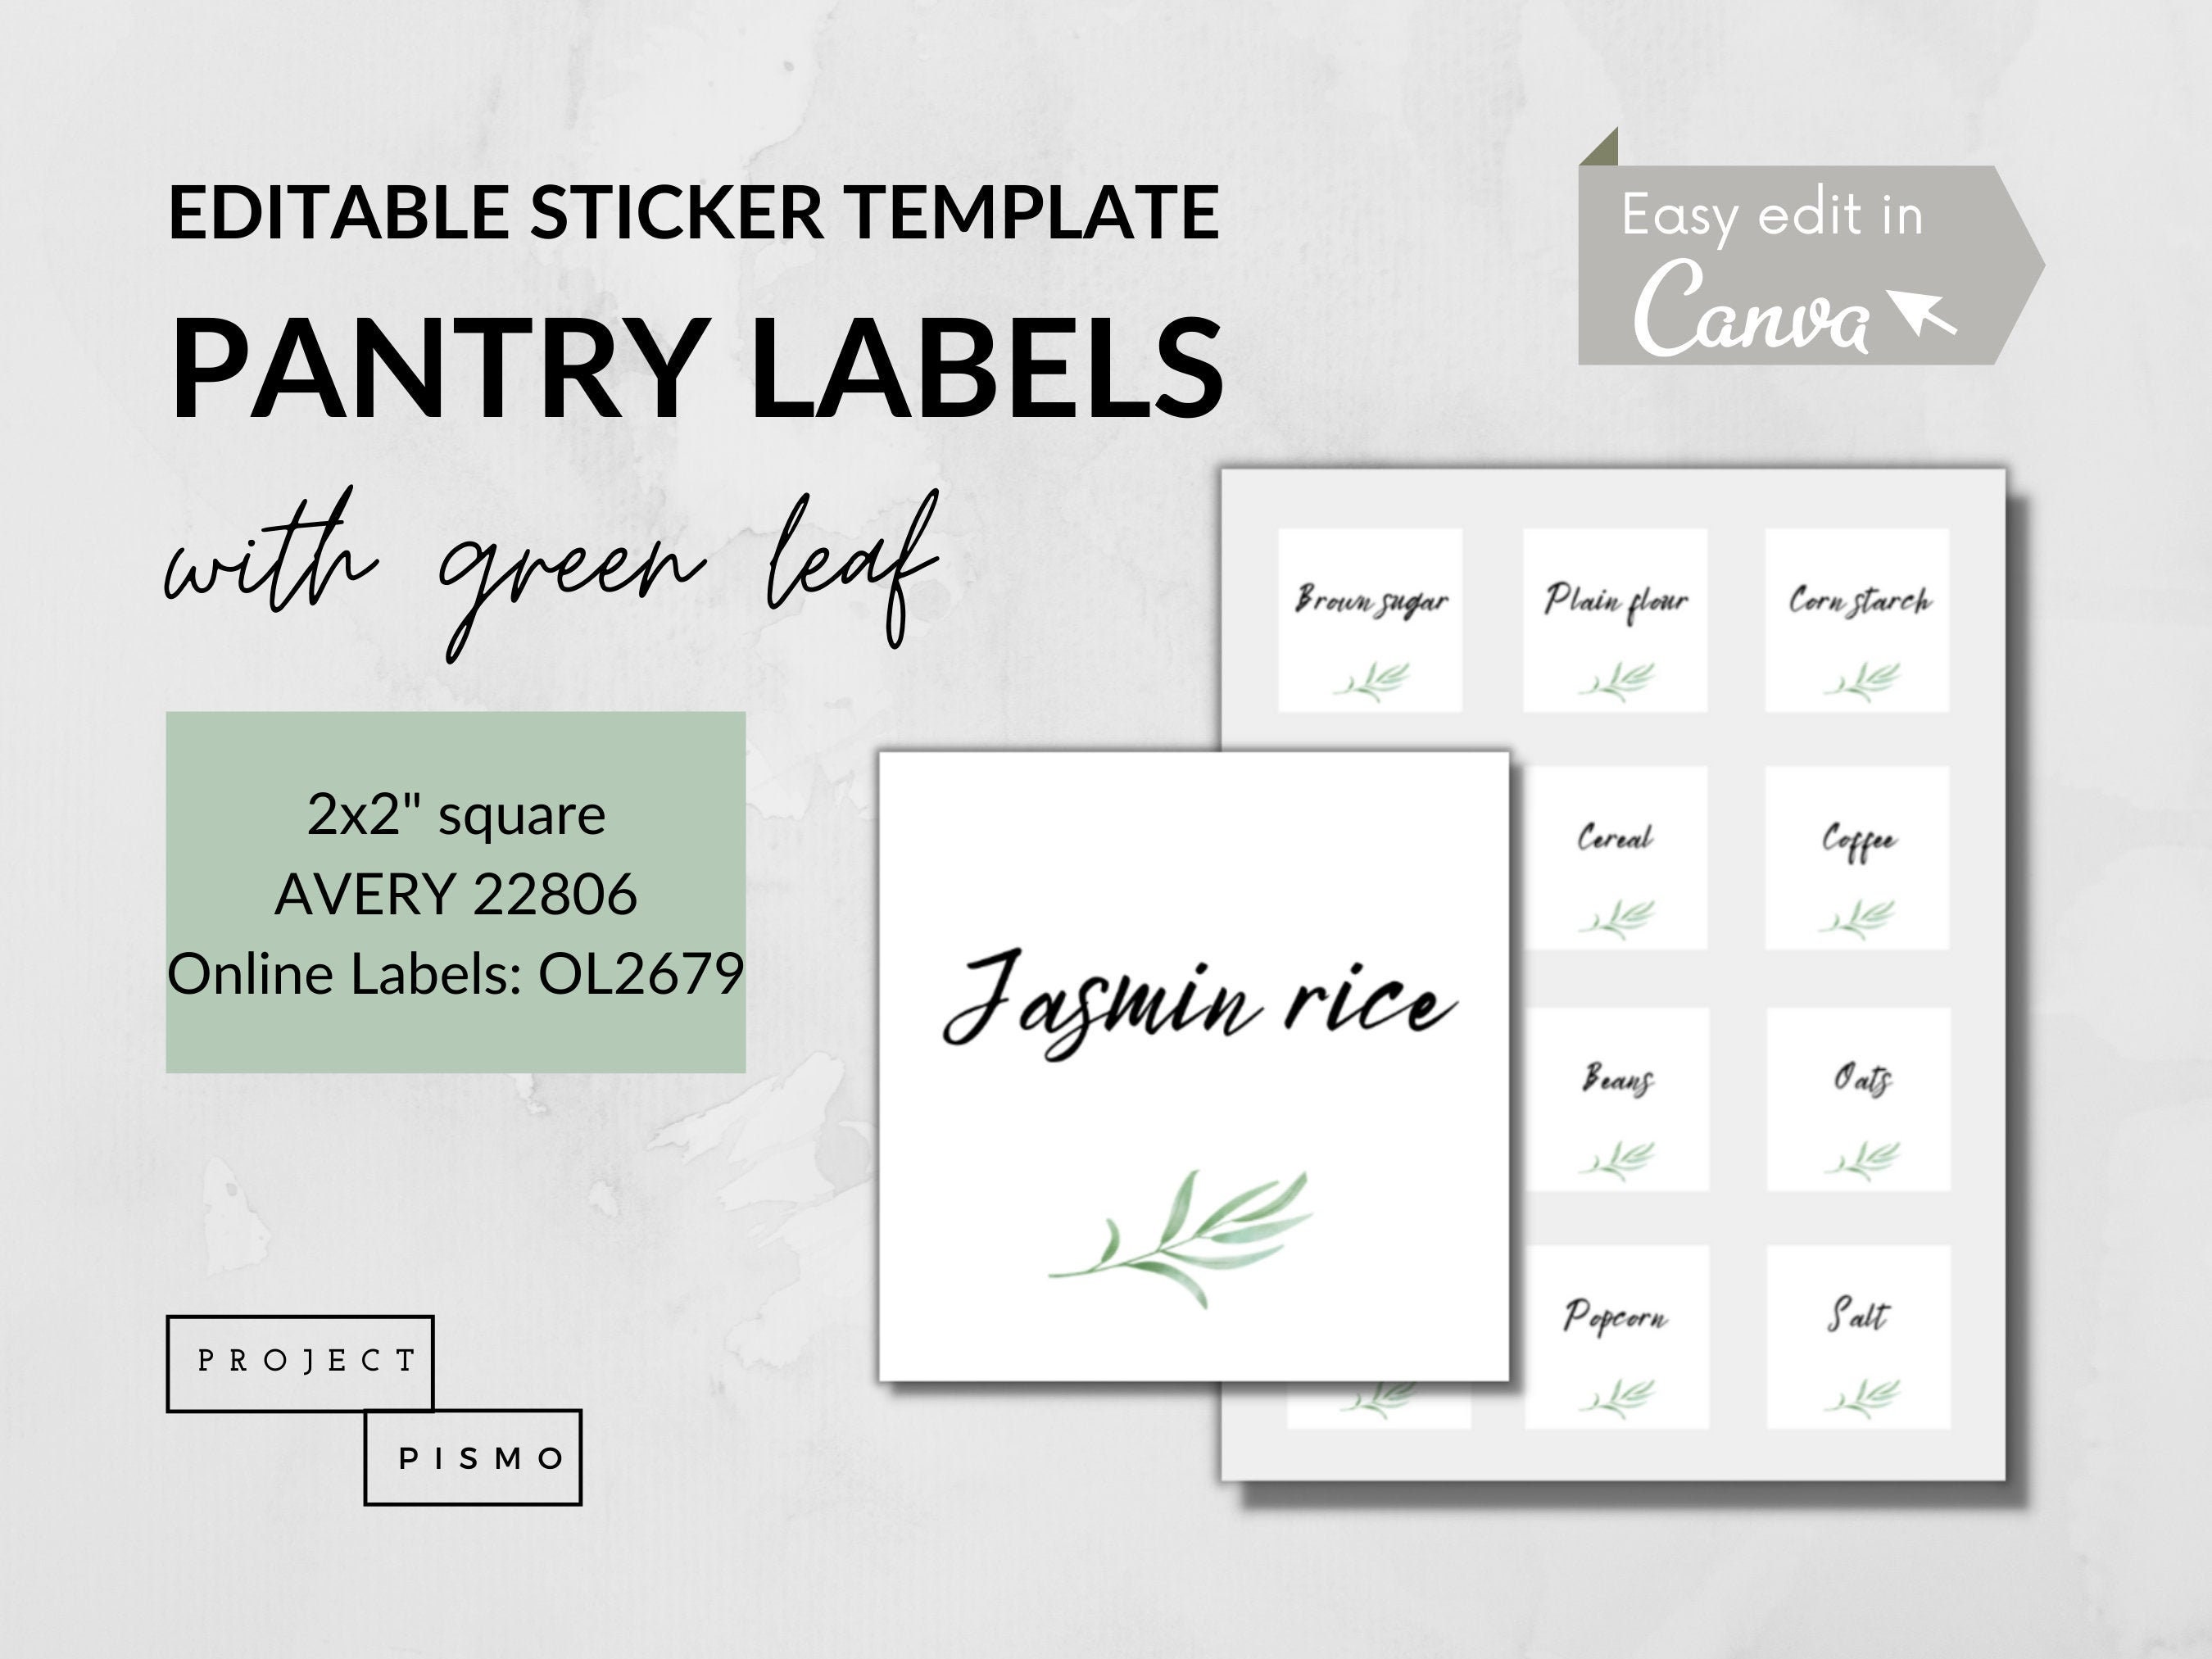 2 inch pantry labels for avery 22806 rectangle stickers Etsy